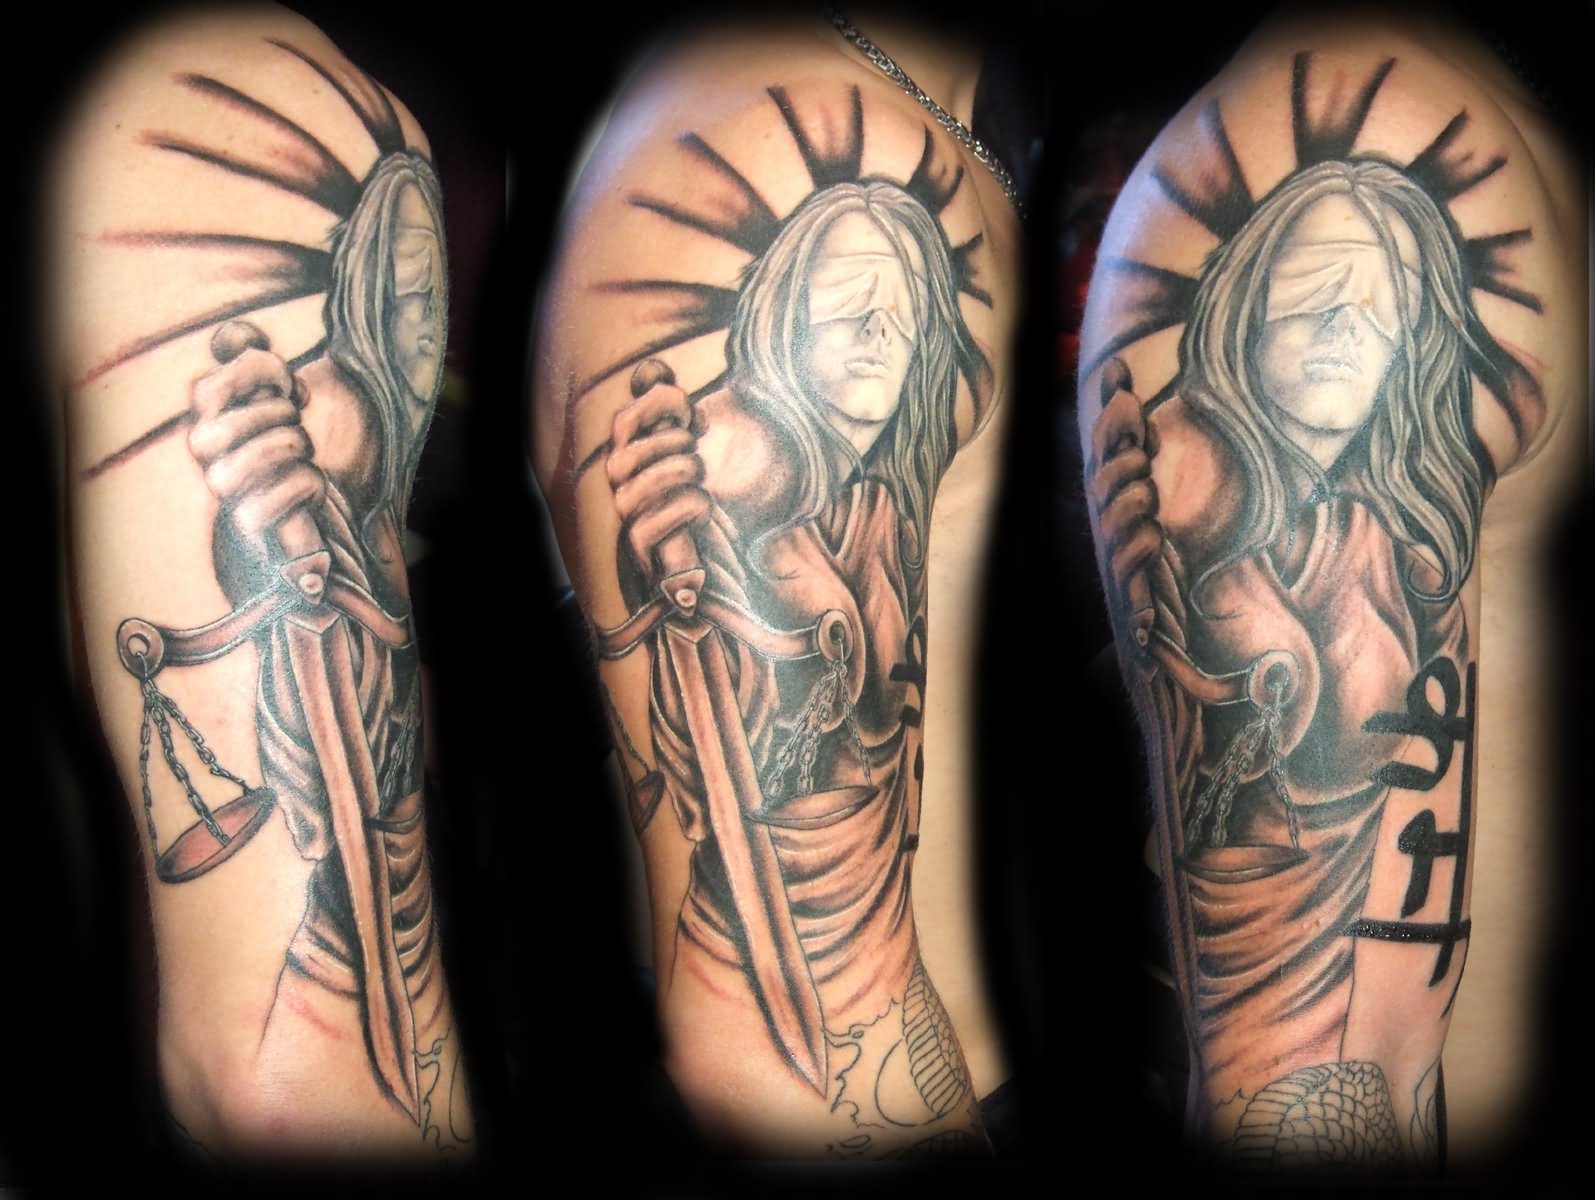 Sword Justice Scale In Lady Hand Tattoo Design For Half Sleeve